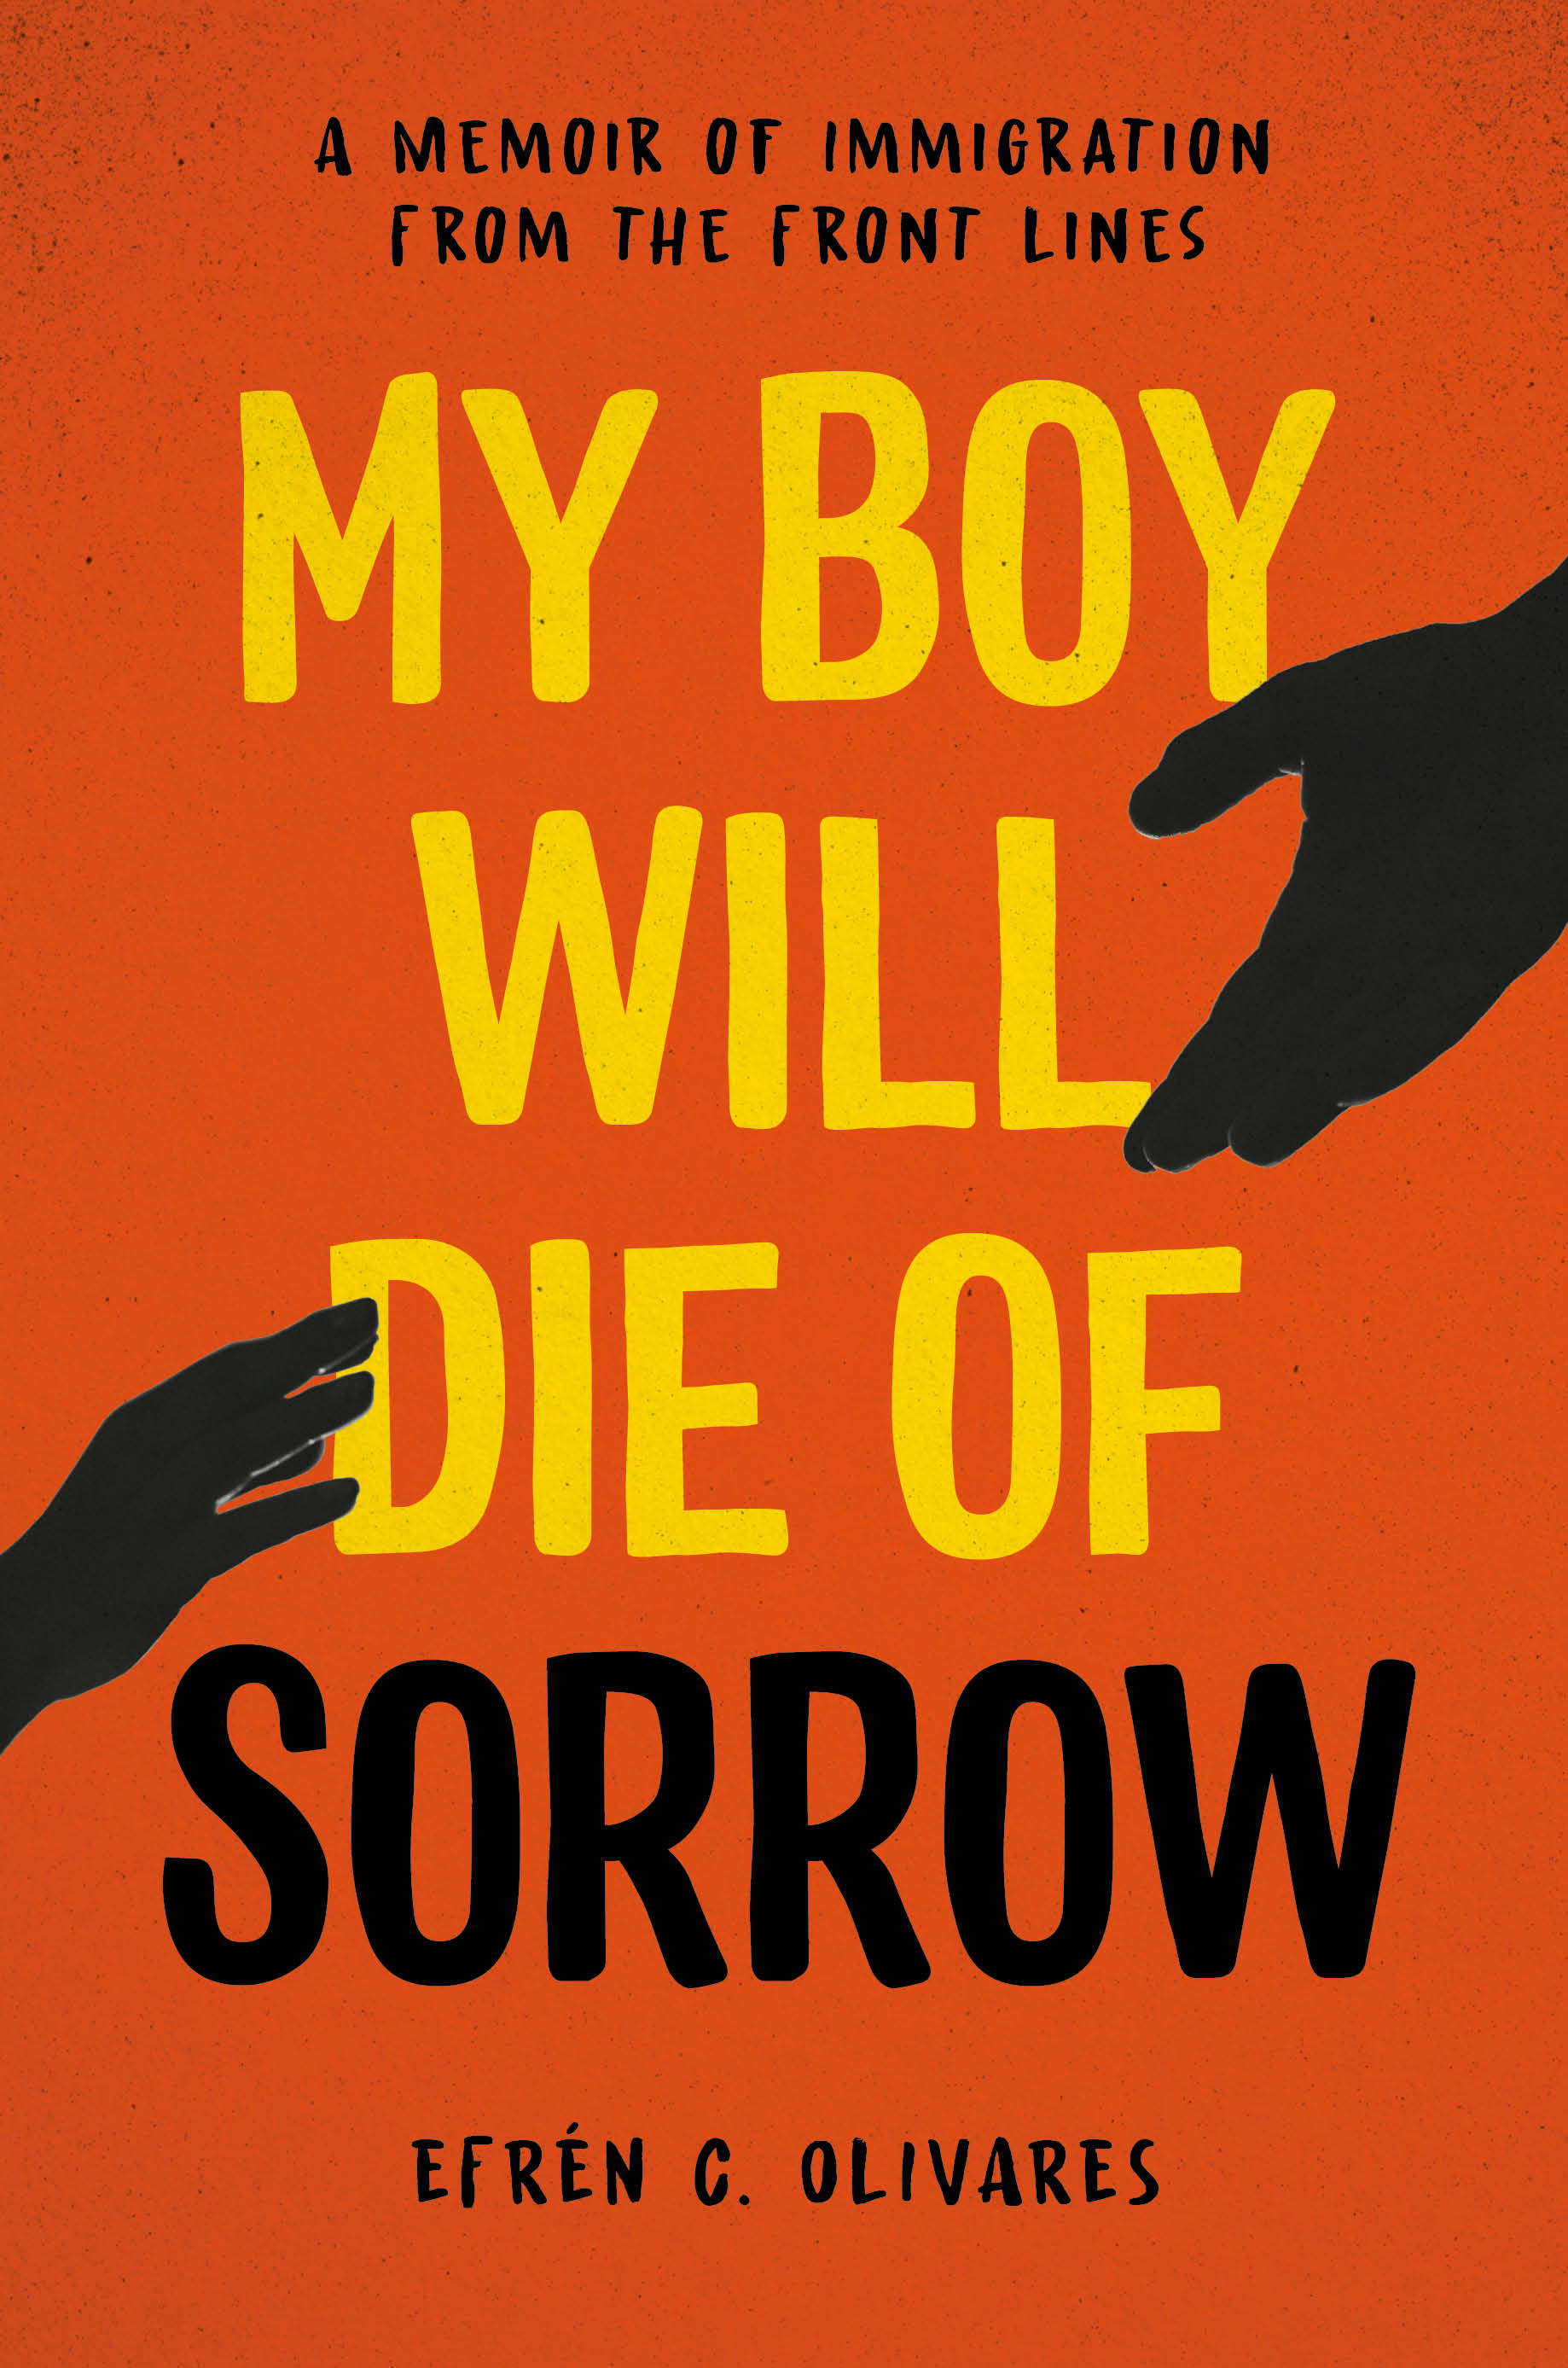 An orange book cover shows two silhouetted hands reaching out to one another. The title reads, My Boy will Die of Sorrow: A Memoir of Immigration from the Front Lines, by Efrén C. Olivares.